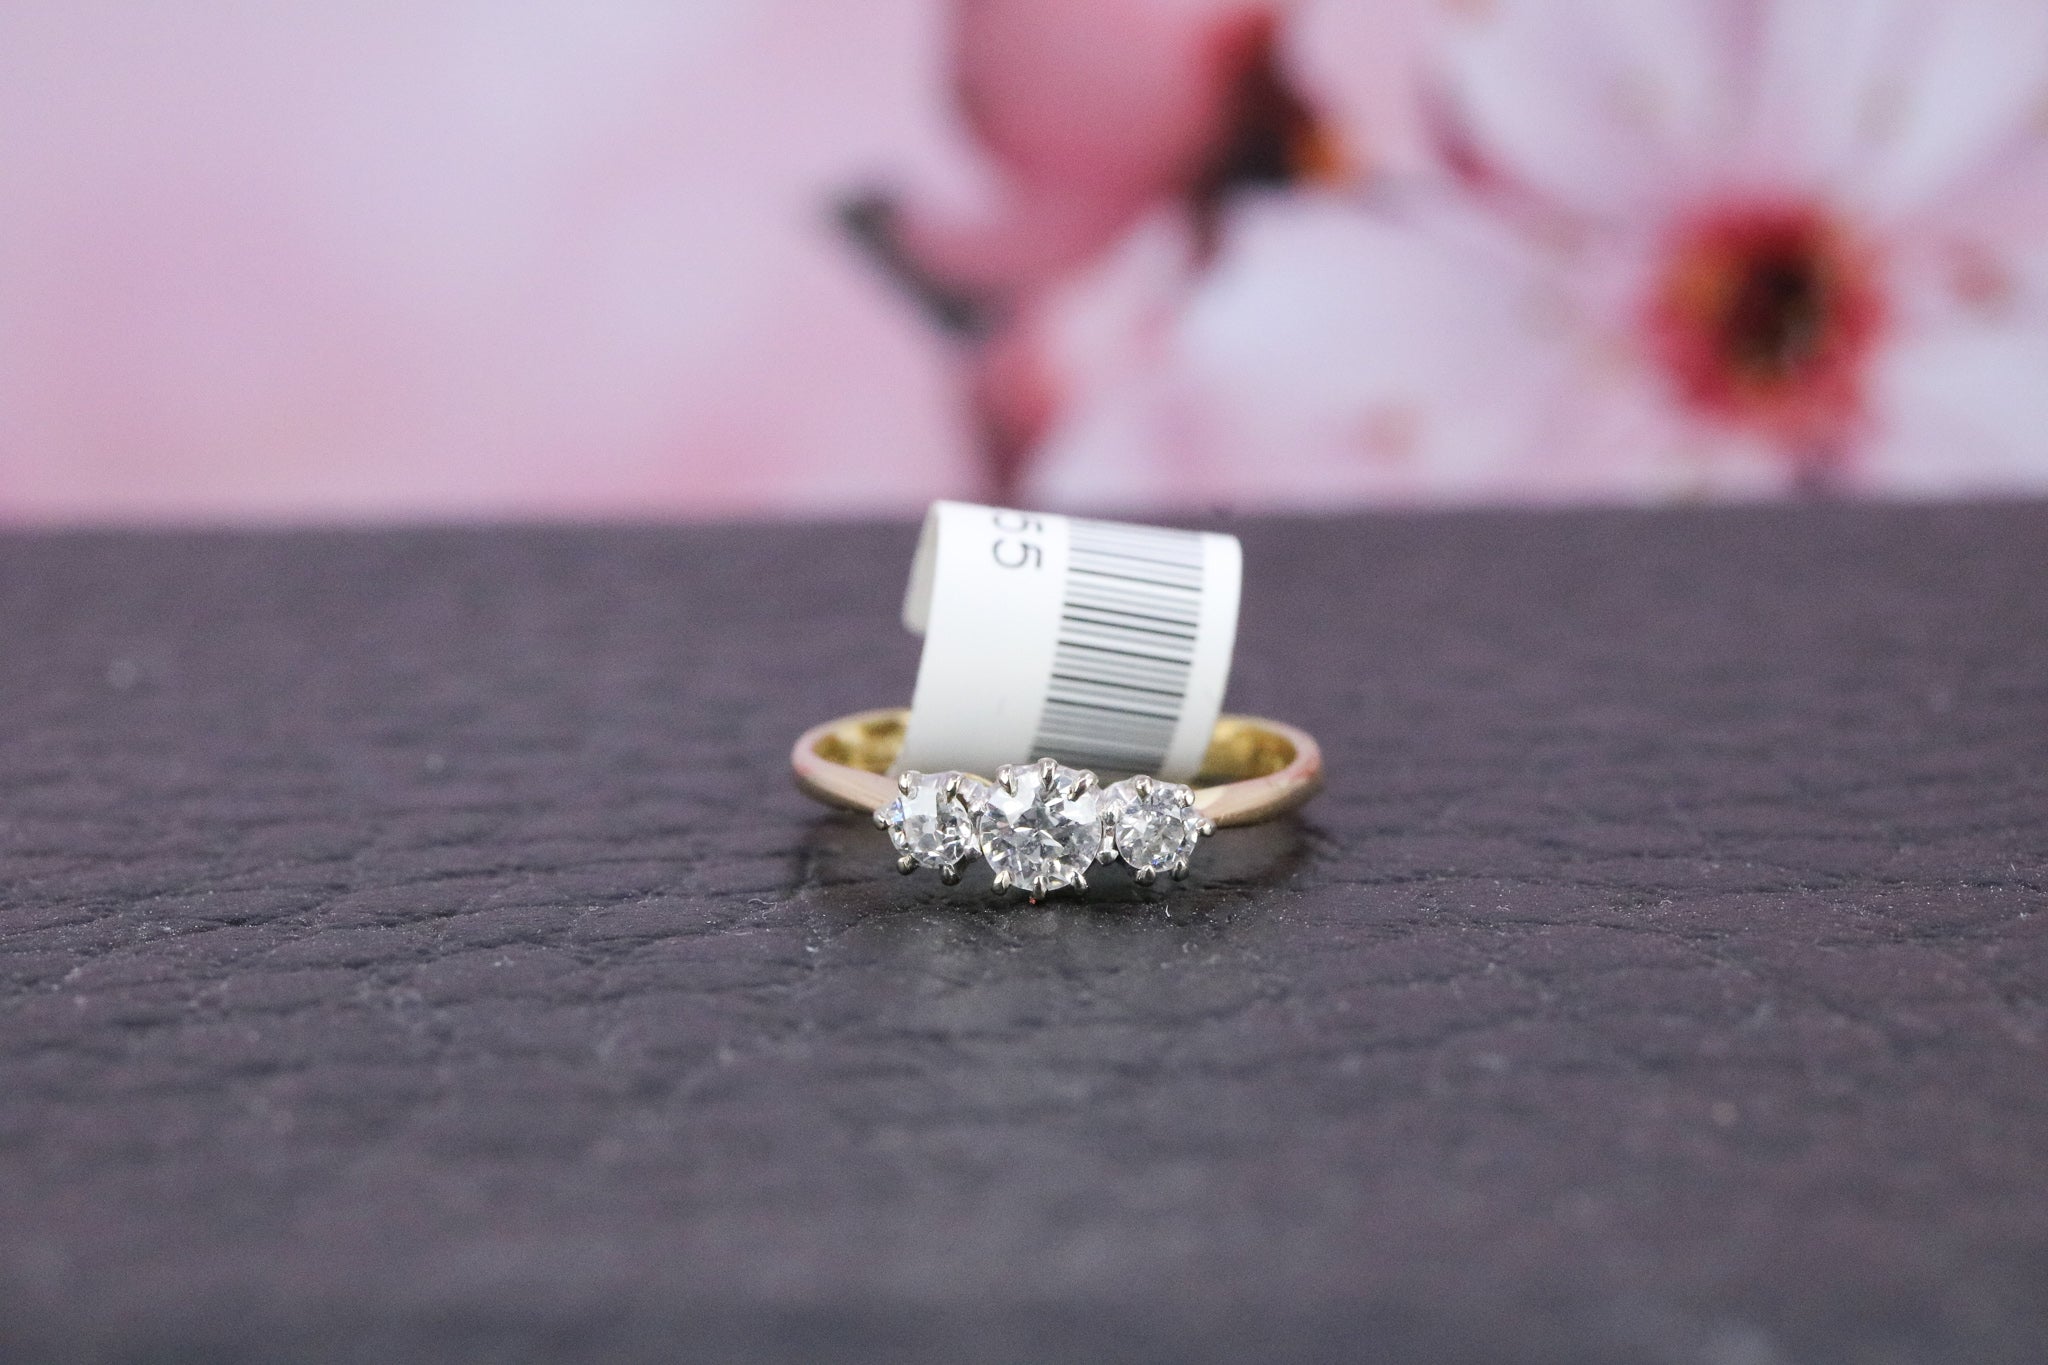 18ct Yellow Gold Diamond Ring - HJ2255 - Hallmark Jewellers Formby & The Jewellers Bench Widnes